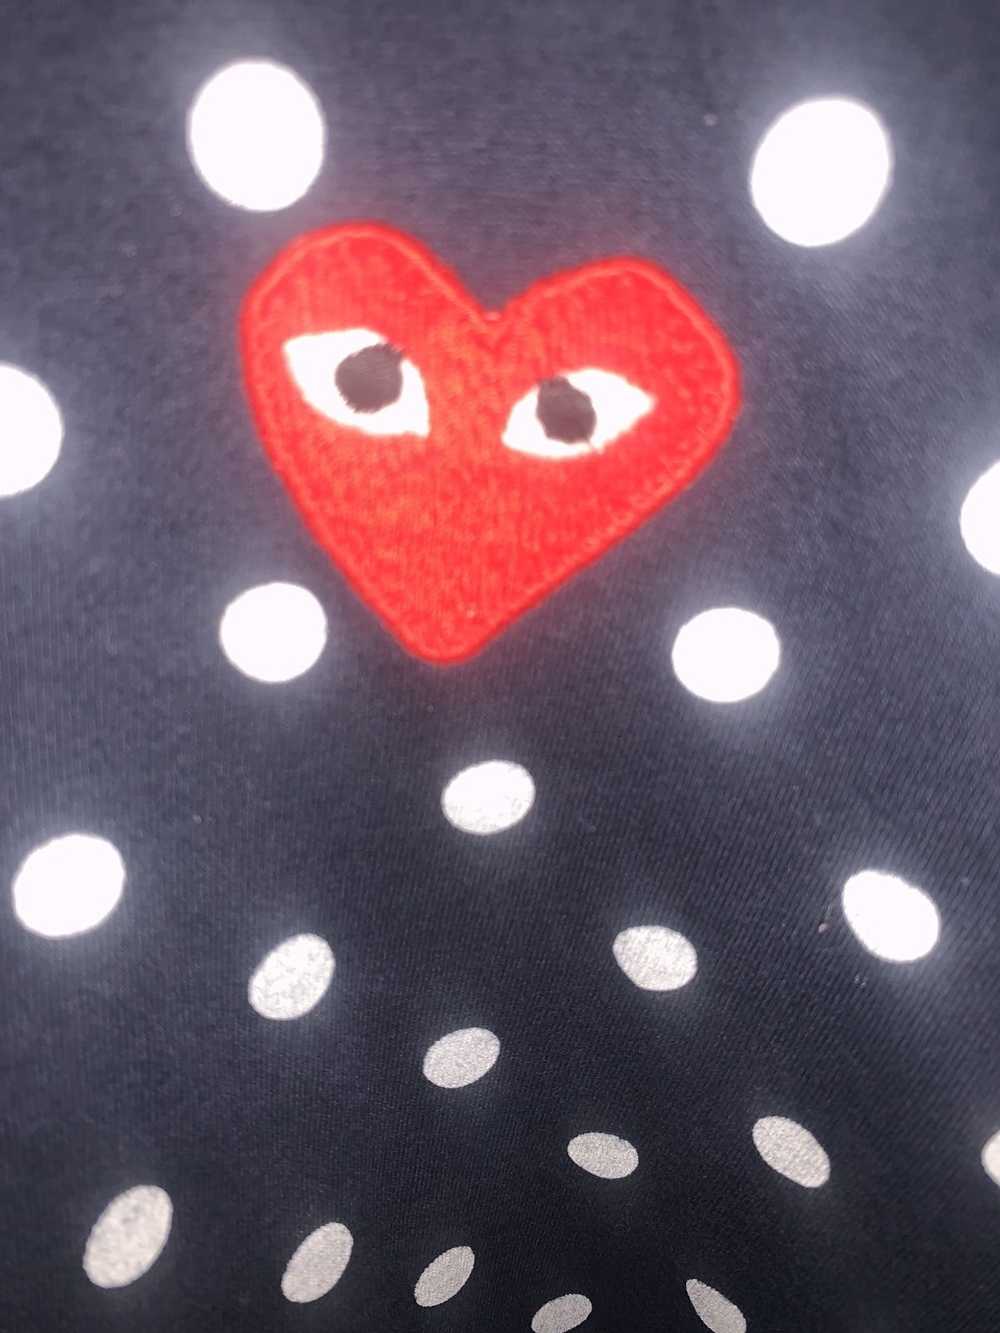 Comme des Garcons Play L/S Blue Polka Dot Tee - image 4